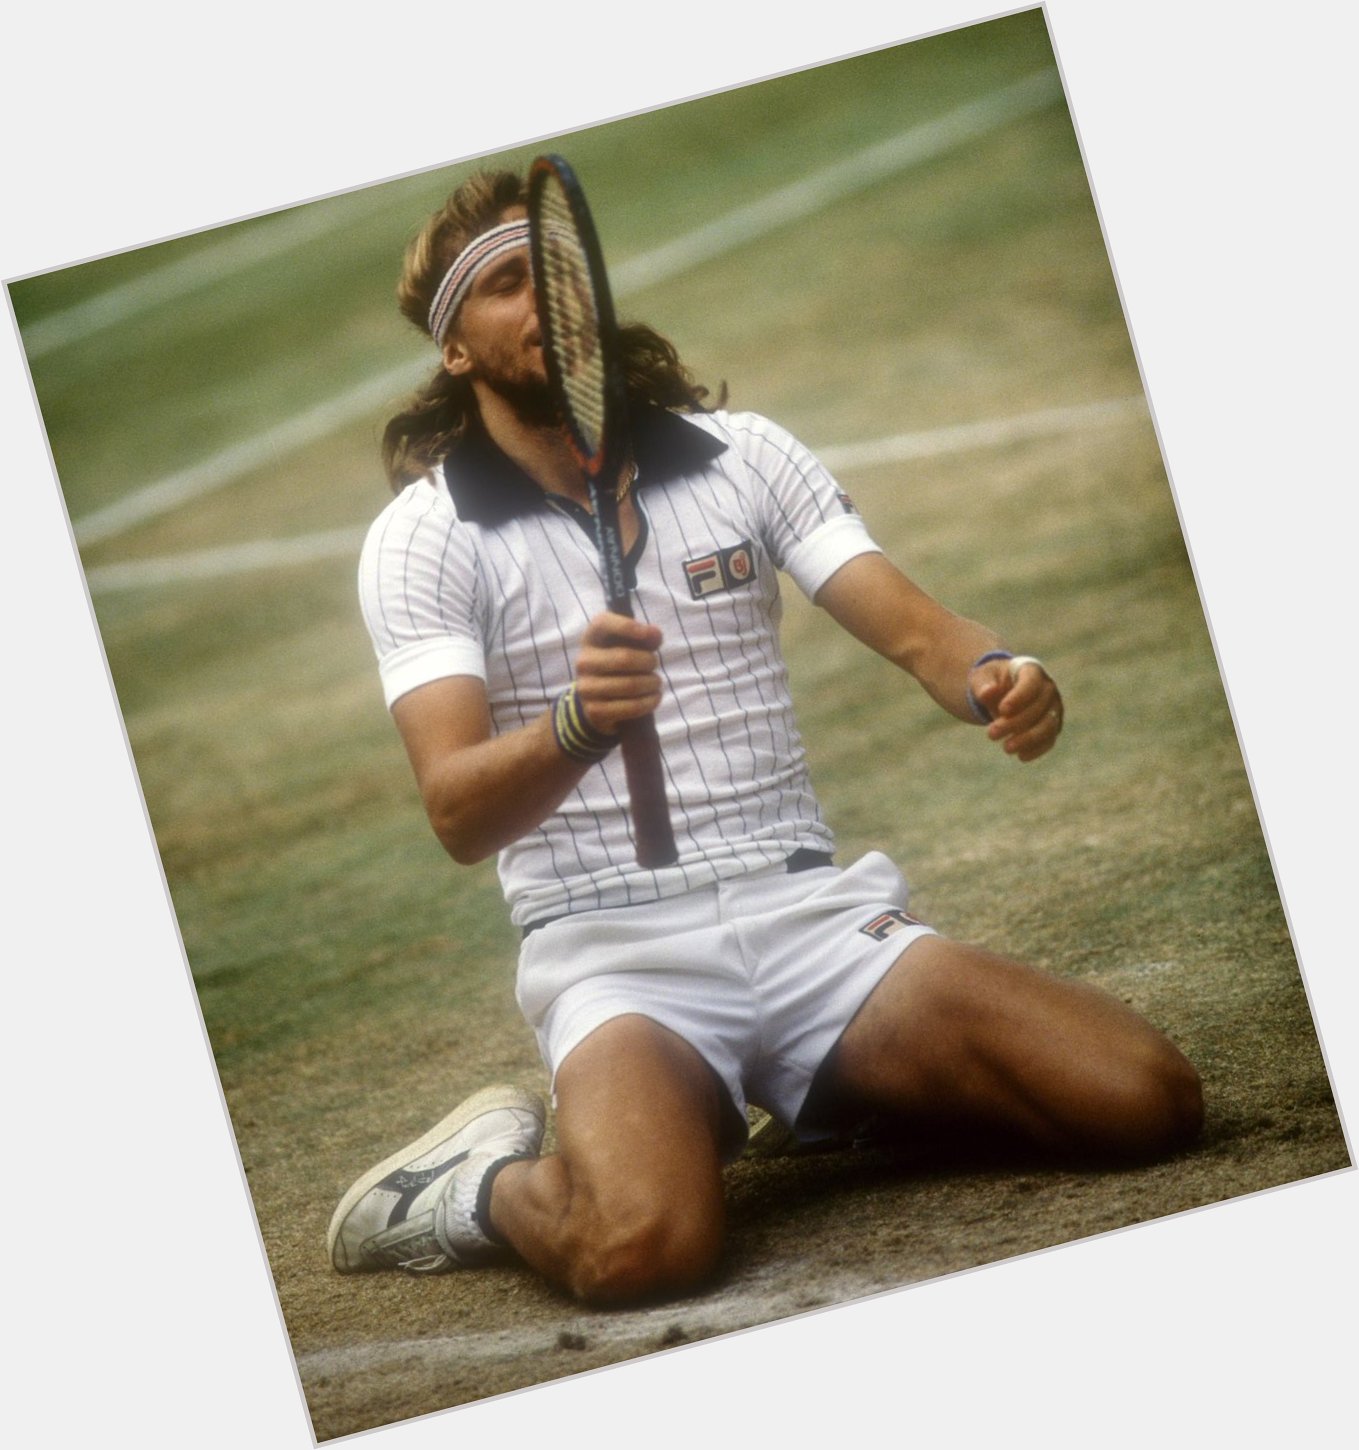 The Ice Man - a legend of our sport Happy birthday, Bjorn Borg! 